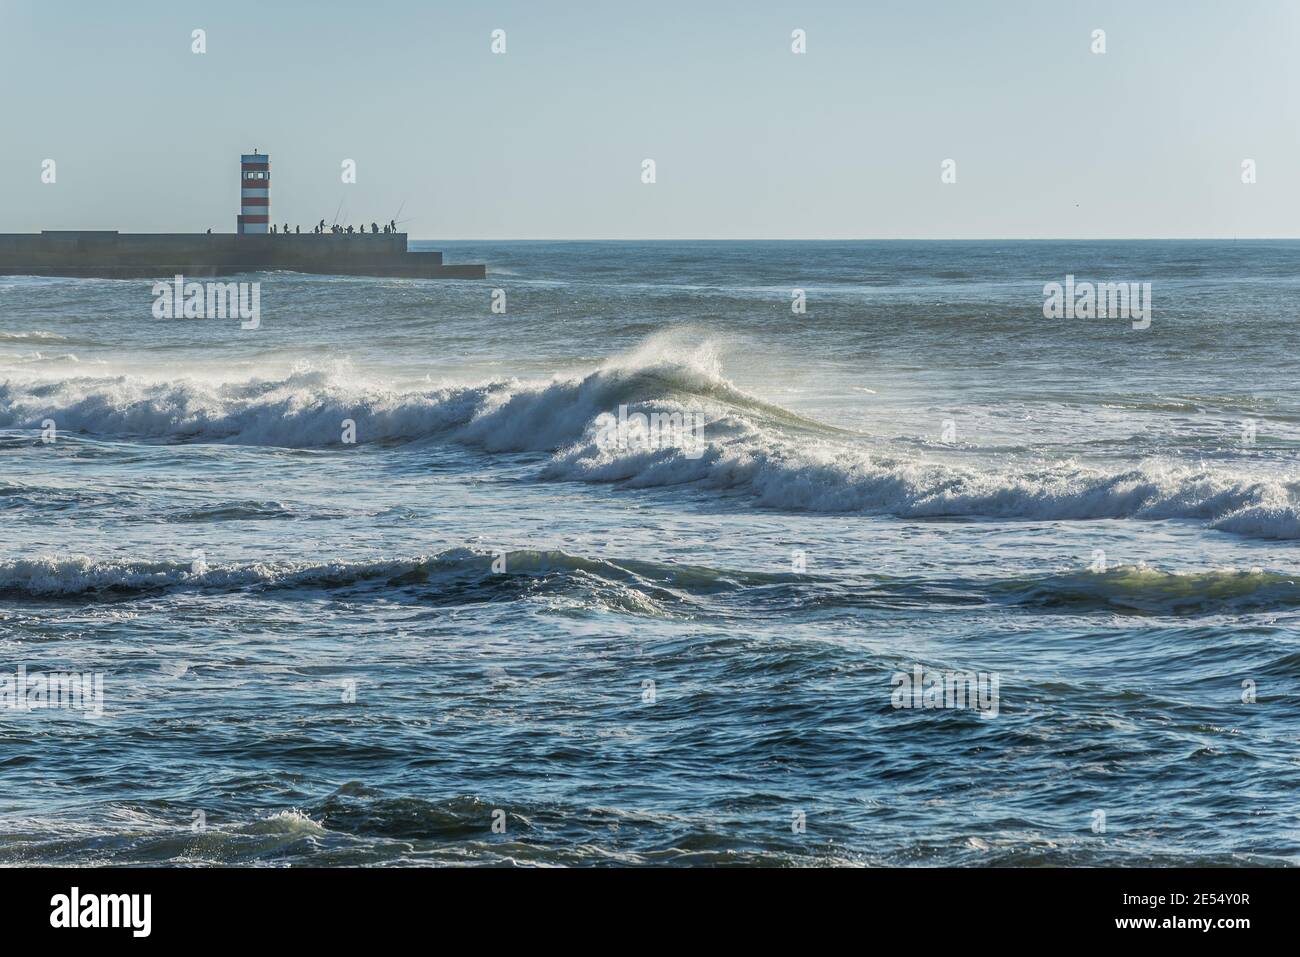 Breakwater with small lighthouse (Farolins da Barra do Douro) in Foz do Douro district of Porto city, second largest city in Portugal Stock Photo